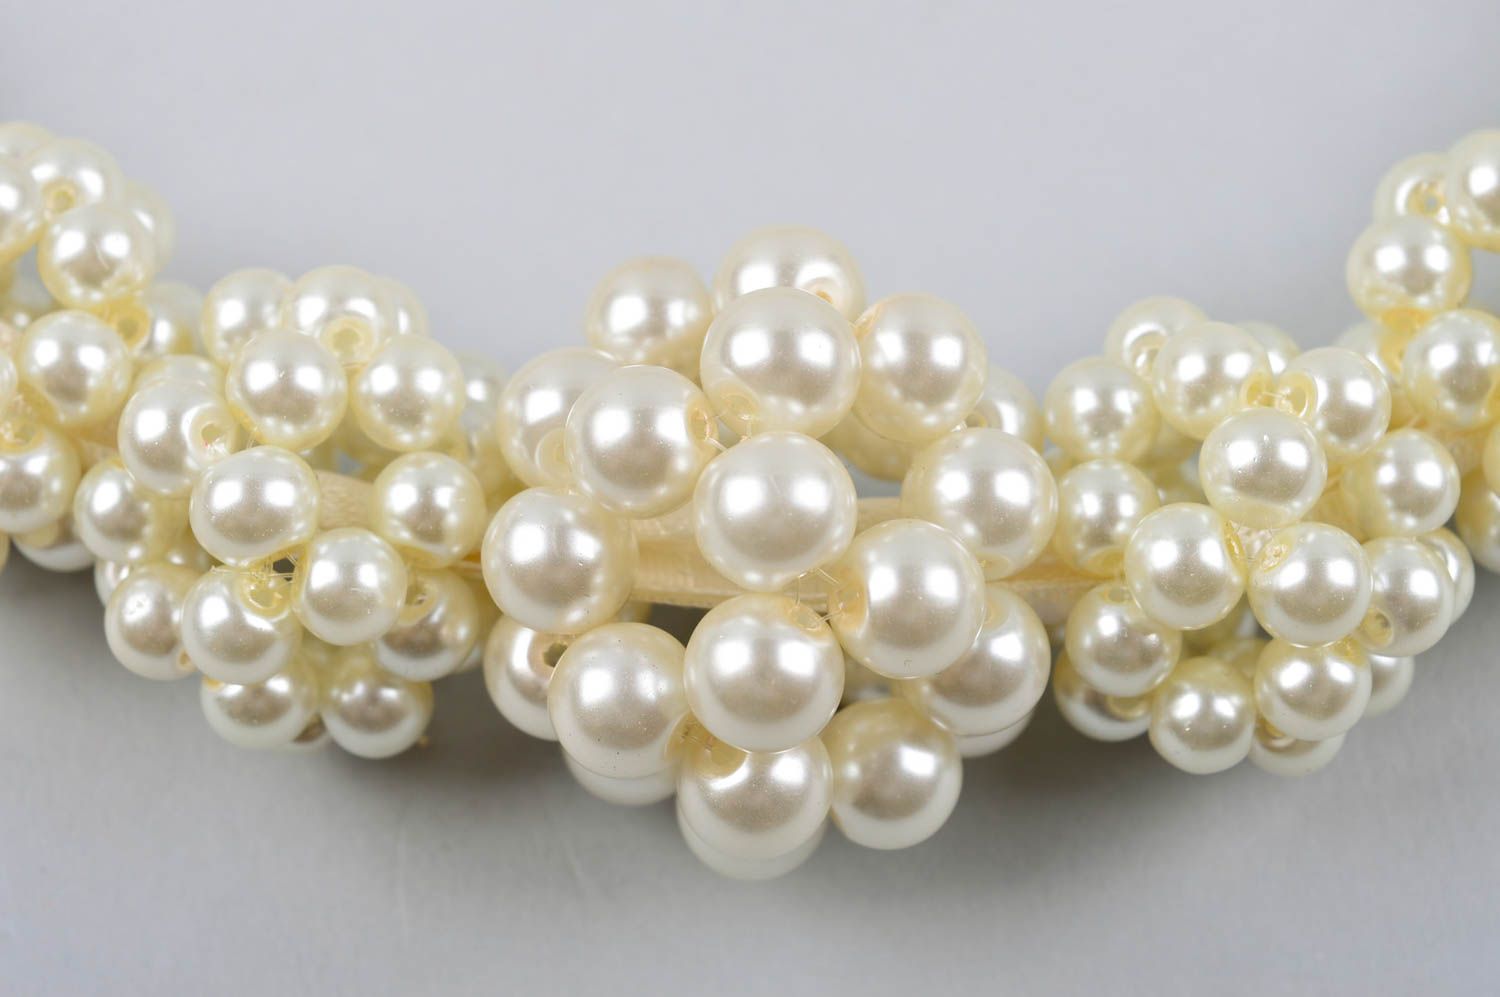 Necklace made of plastic pearls handmade accessory stylish jewelry for women photo 3